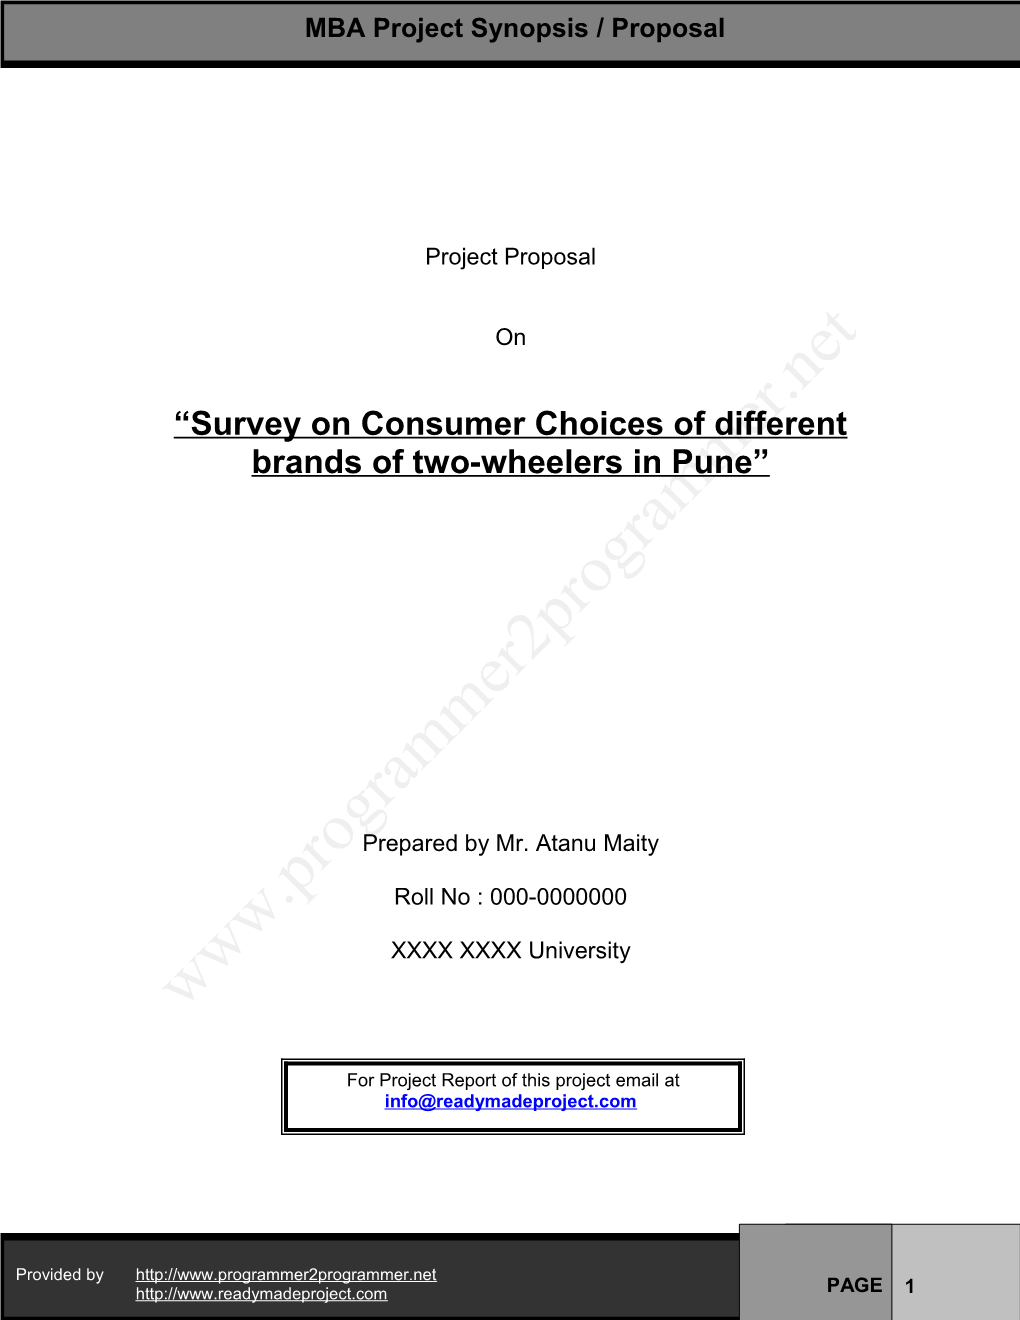 Survey on Consumer Choices of Different Brands of Two-Wheelers in Pune